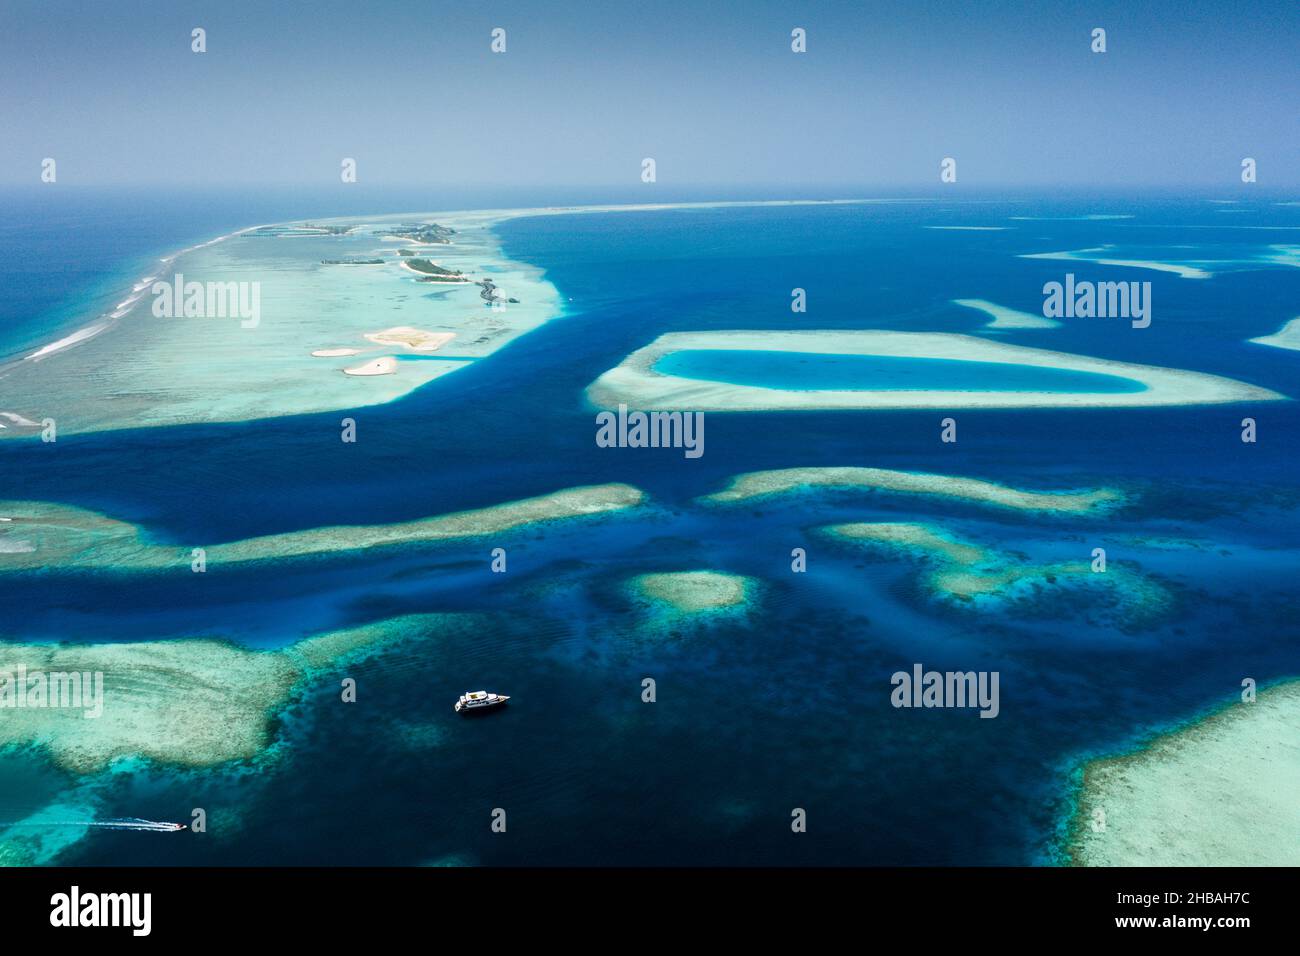 Impressions of South Male Atoll, Indian Ocean, Maldives Stock Photo